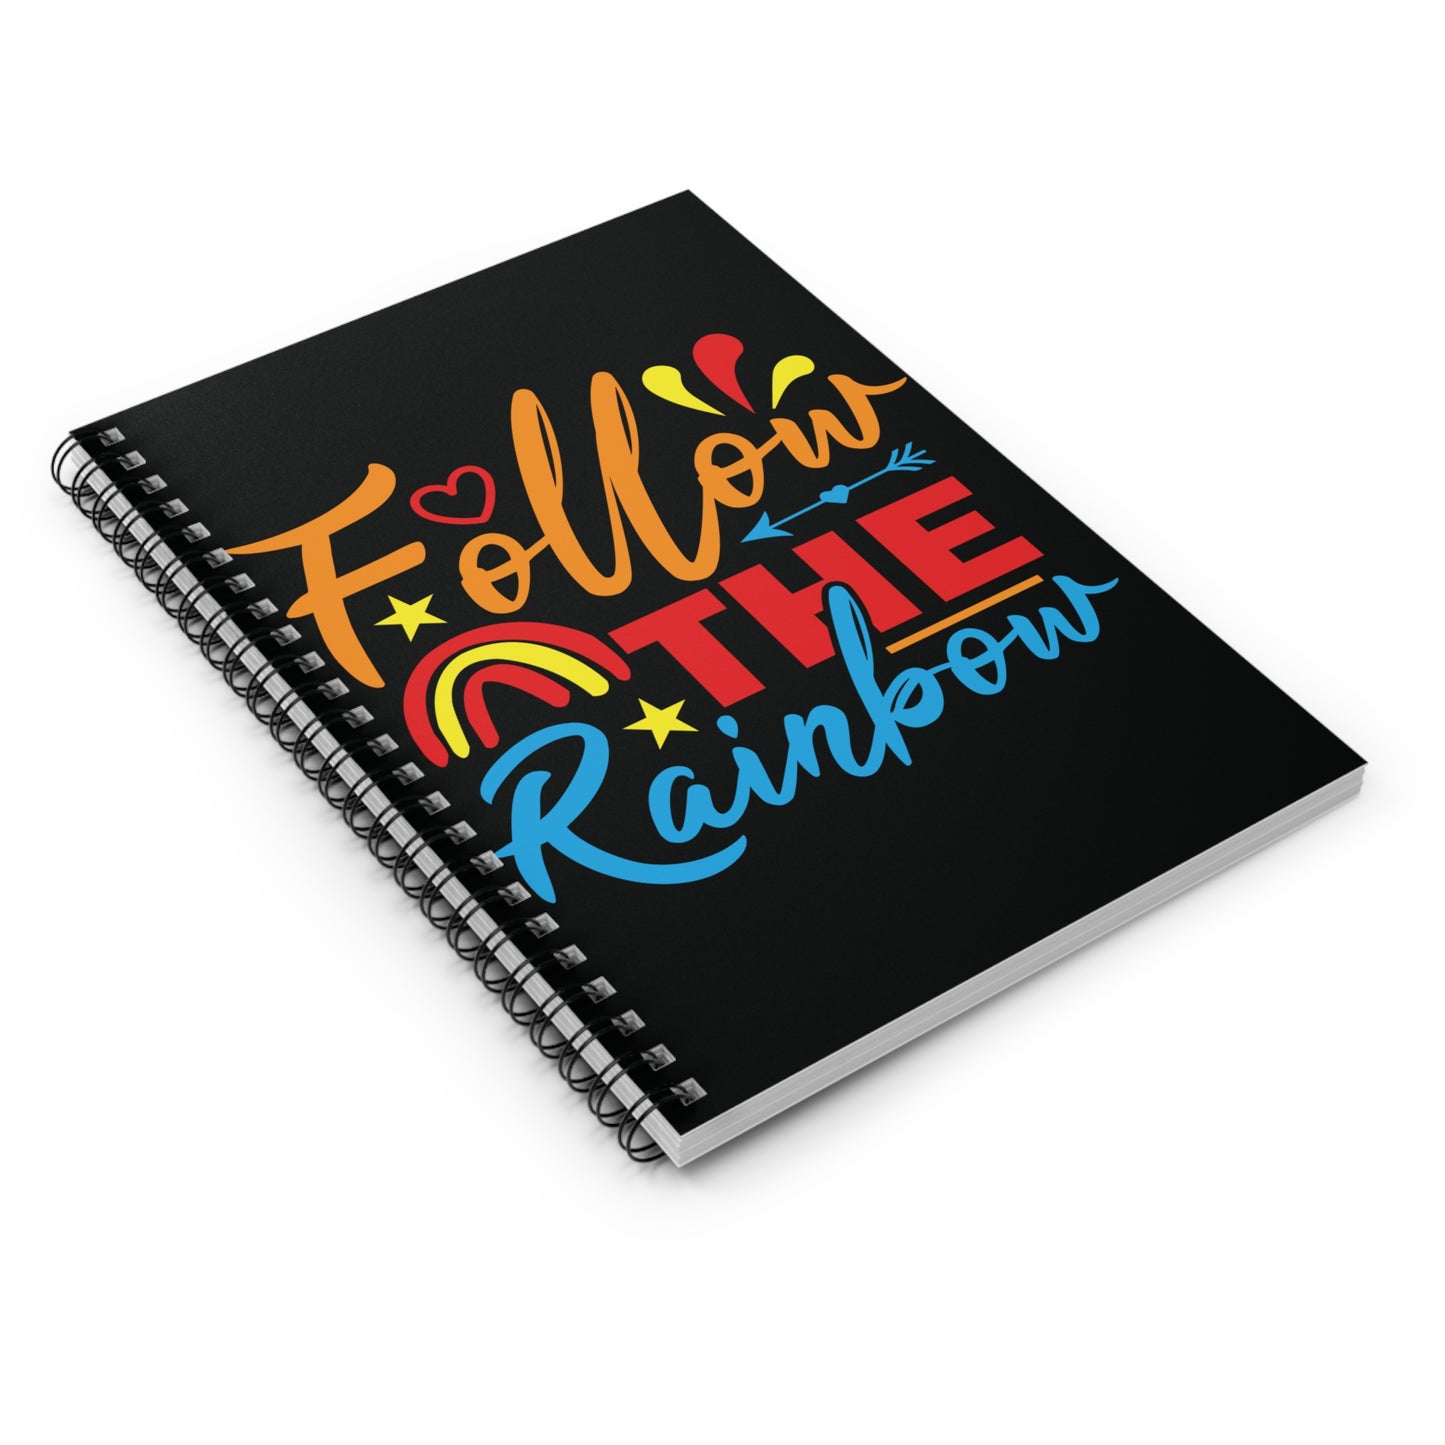 Follow the Rainbow: Black Spiral Notebook - Log Books - Journals - Diaries - and More Custom Printed by TheGlassyLass